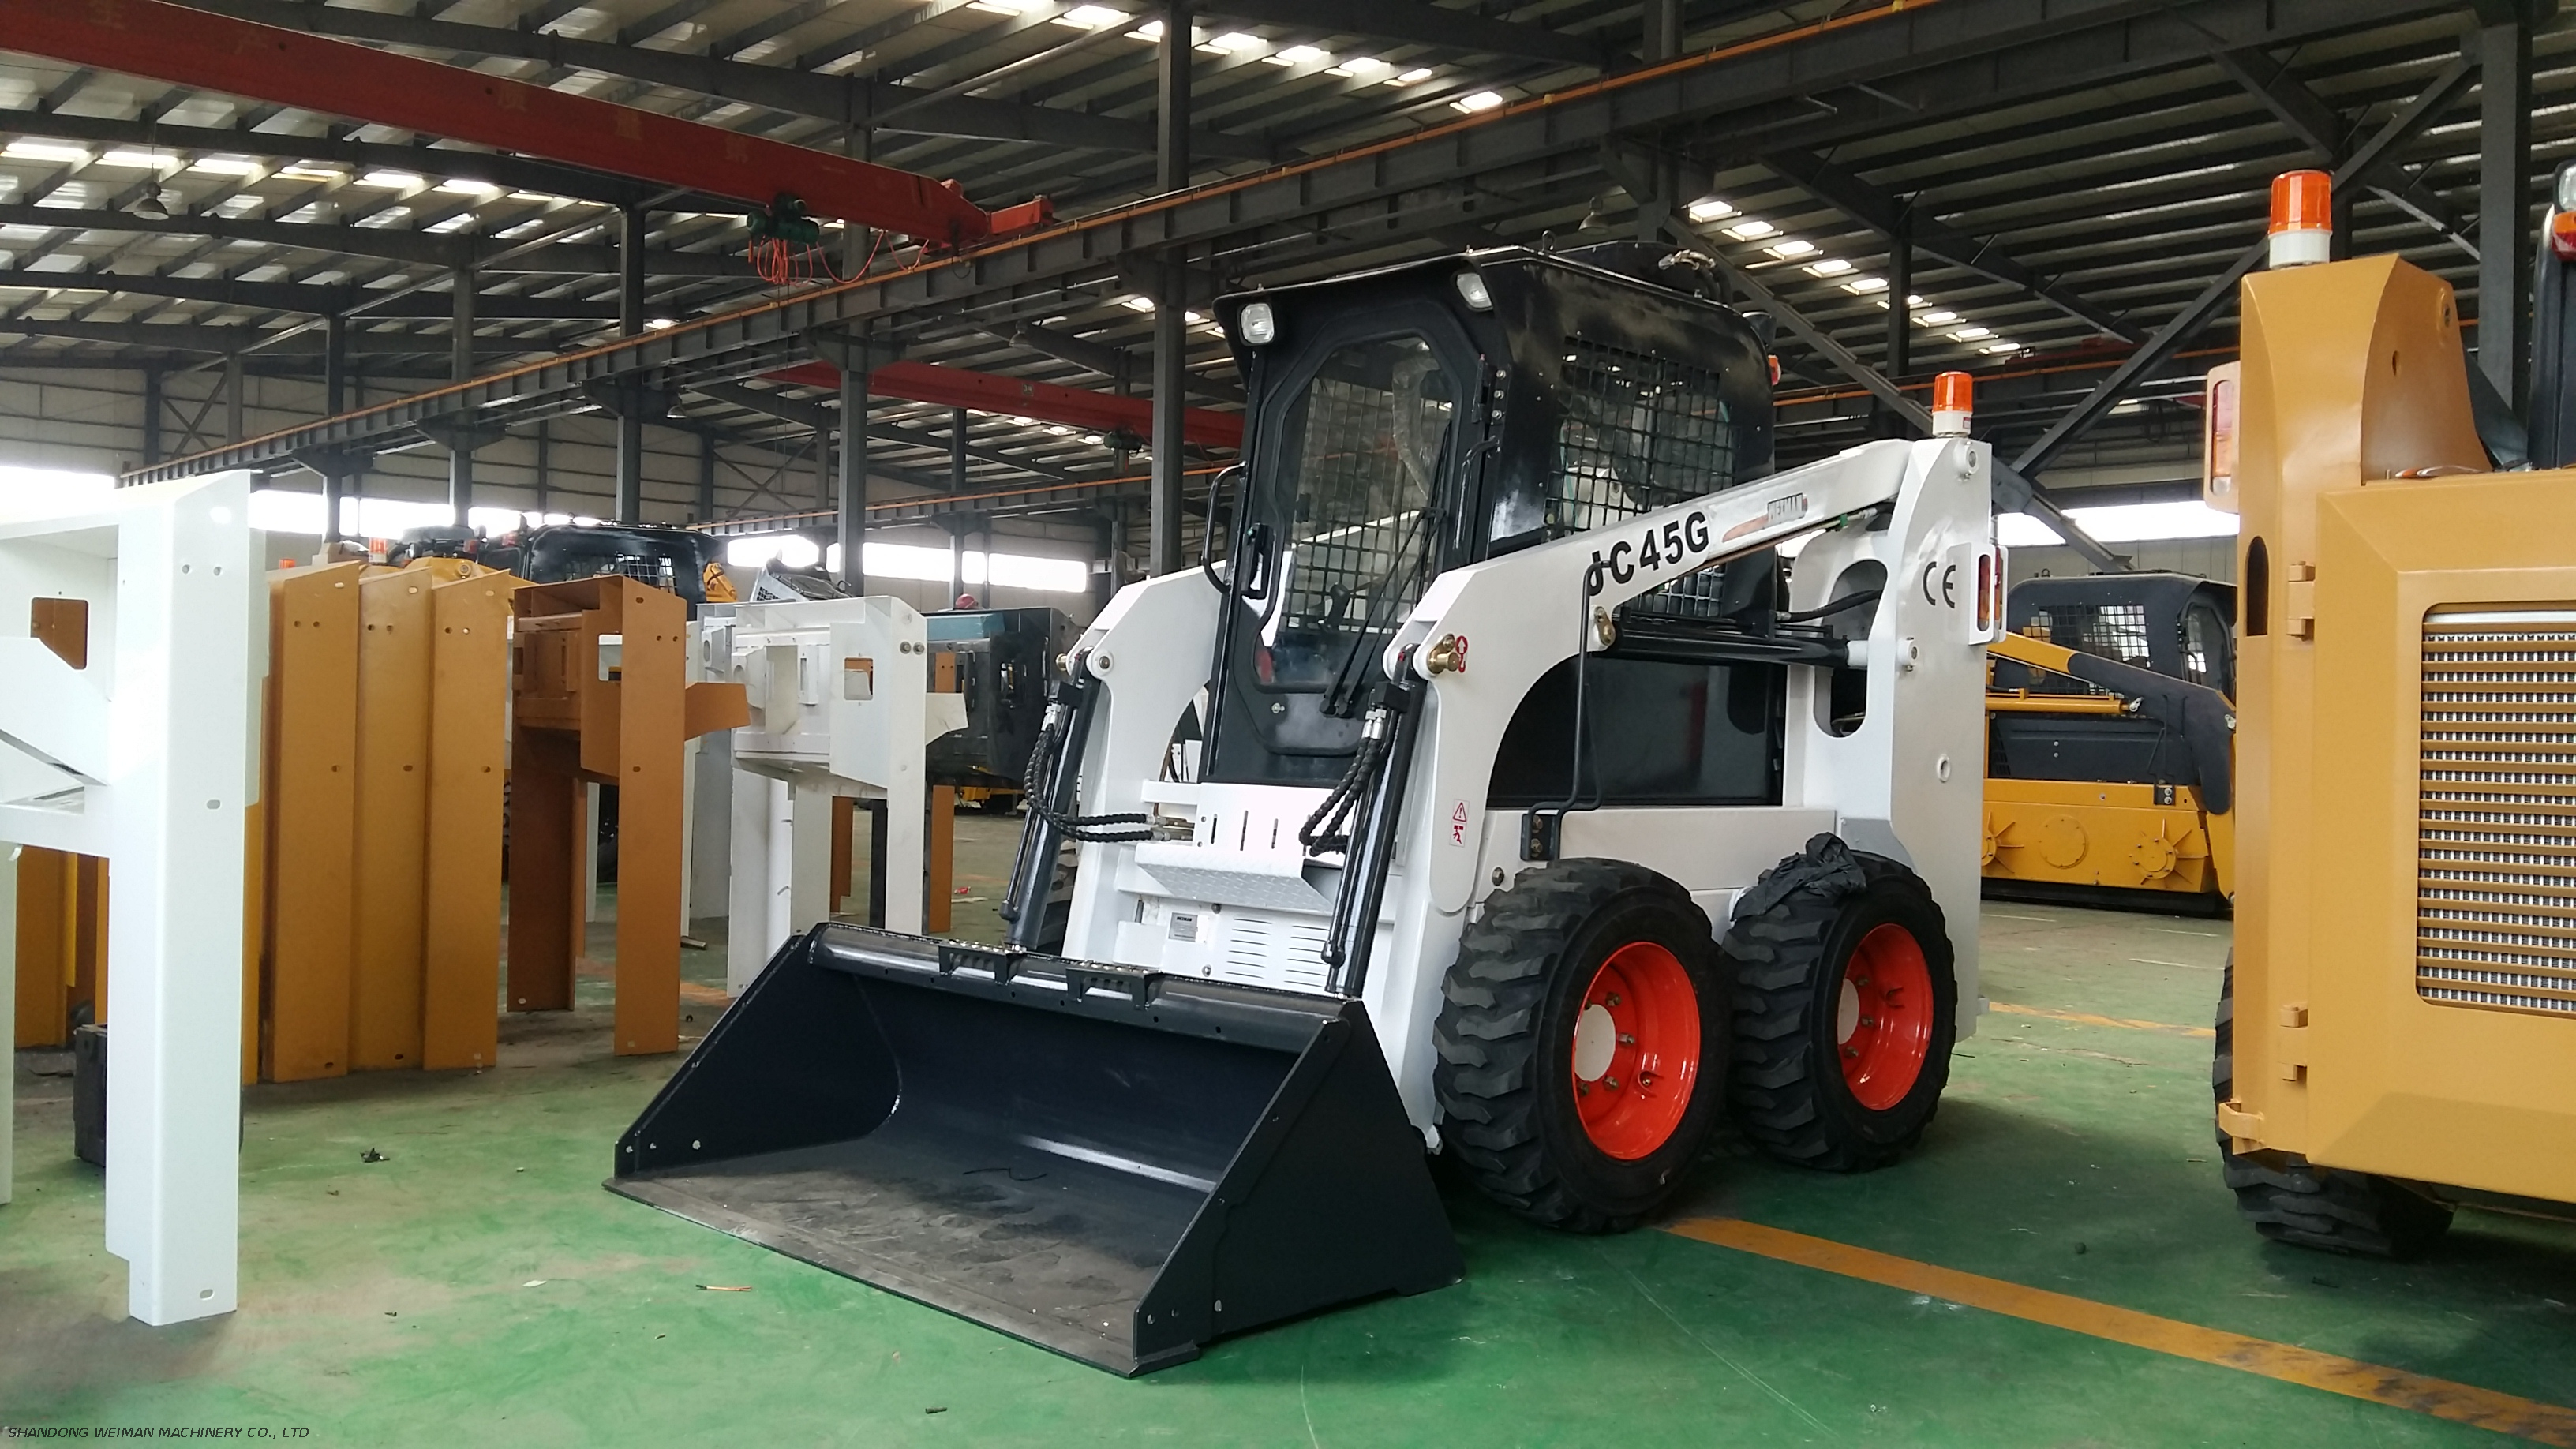 WEIMAN JC45G SKID STEER LOADER WITH CLOSED CABIN 